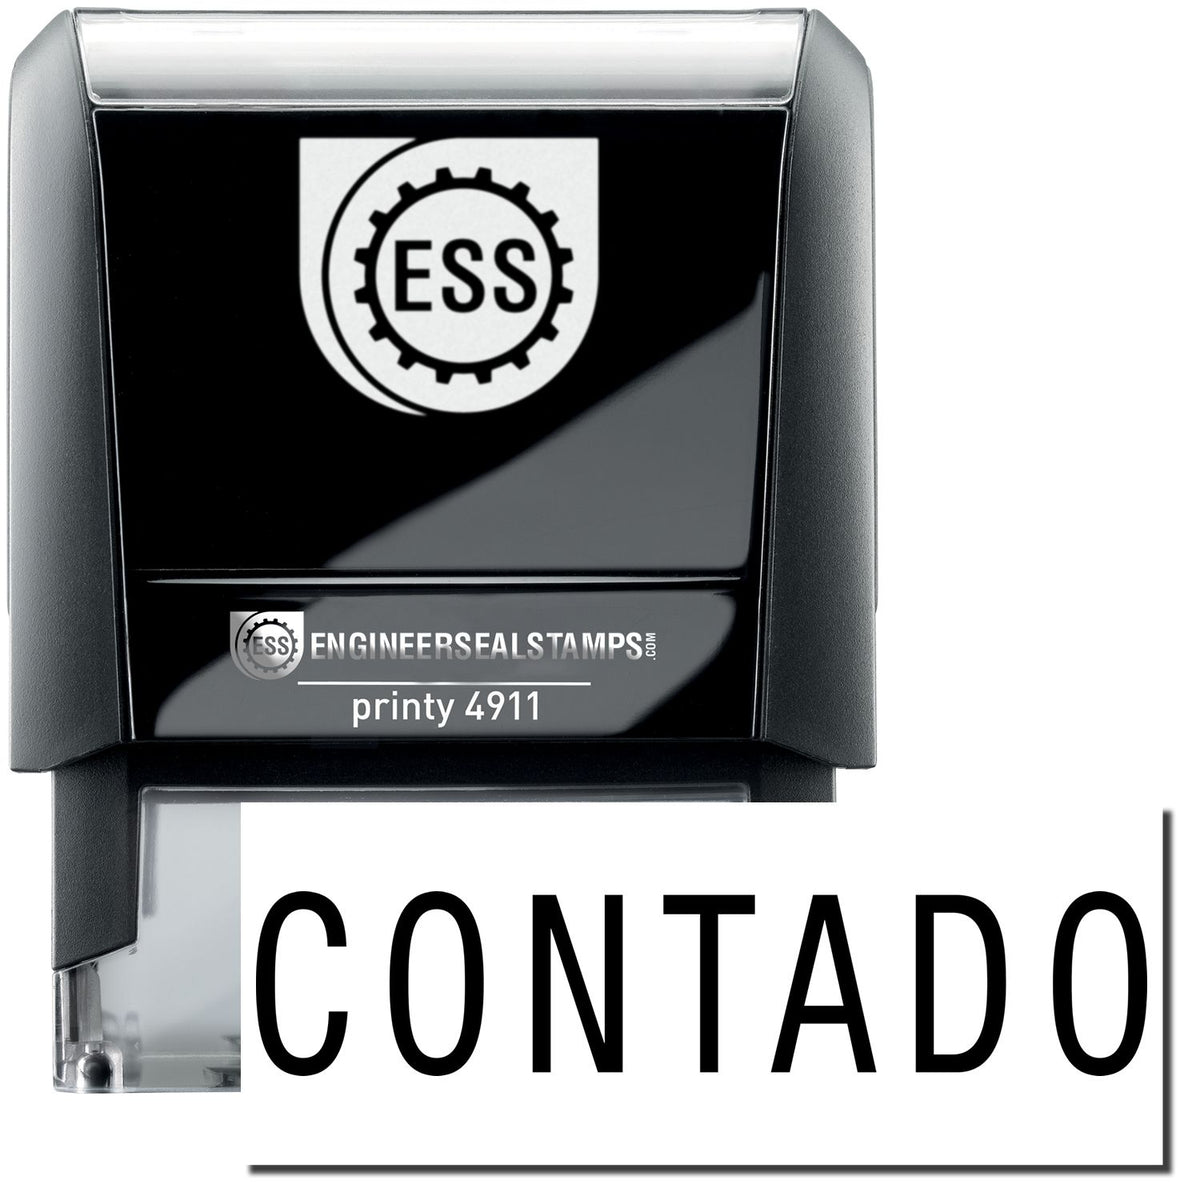 A self-inking stamp with a stamped image showing how the text &quot;CONTADO&quot; is displayed after stamping.